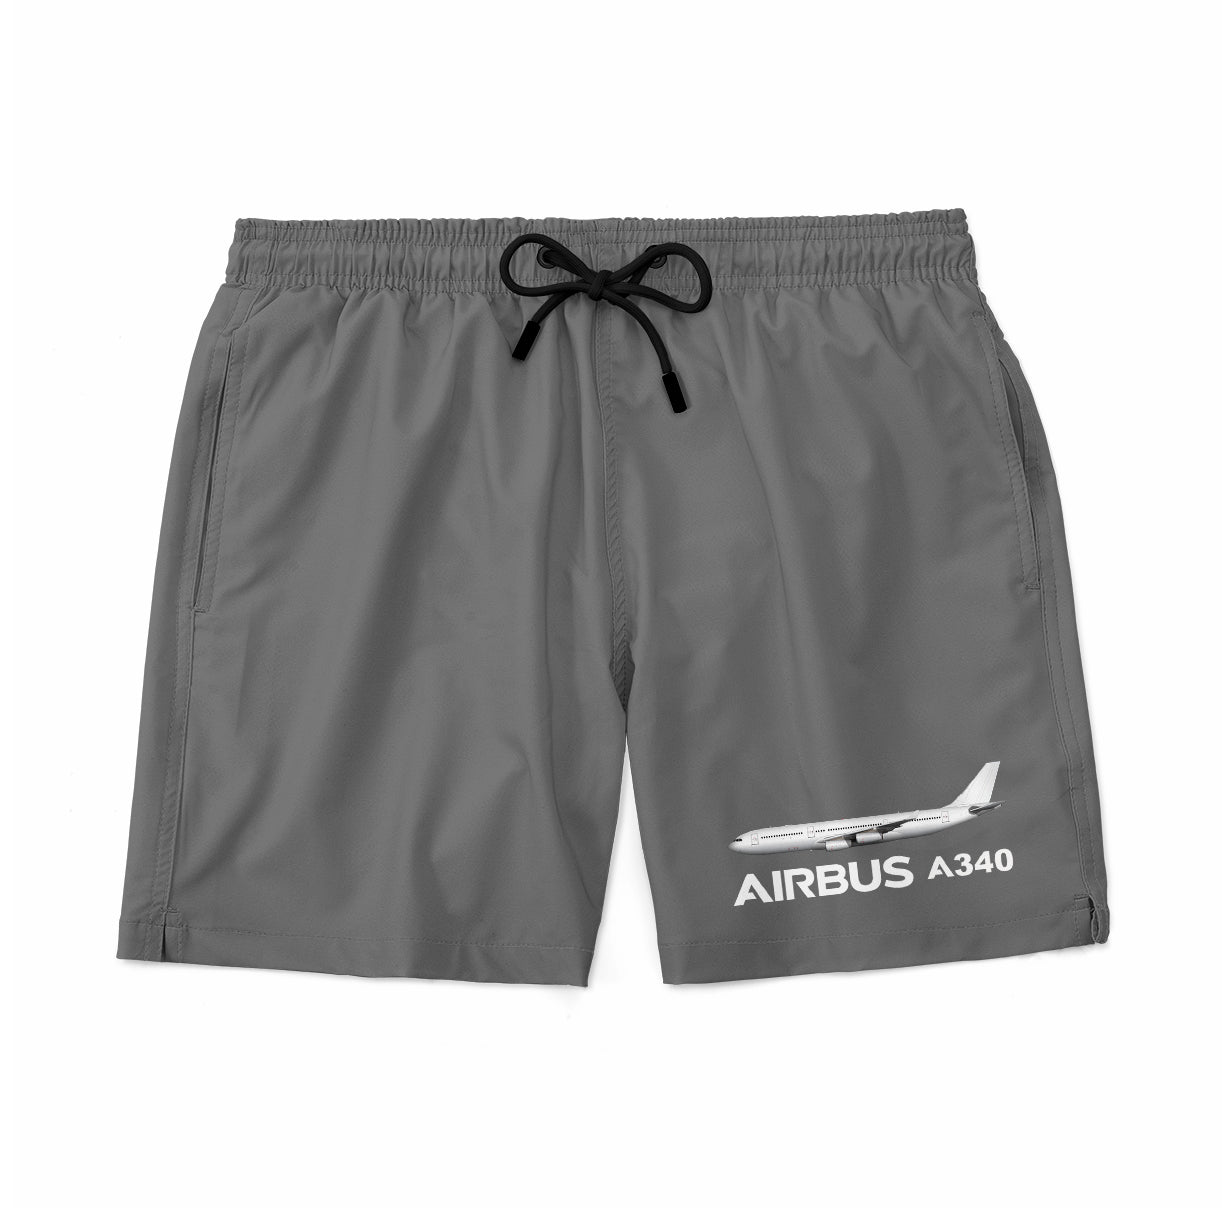 The Airbus A340 Designed Swim Trunks & Shorts